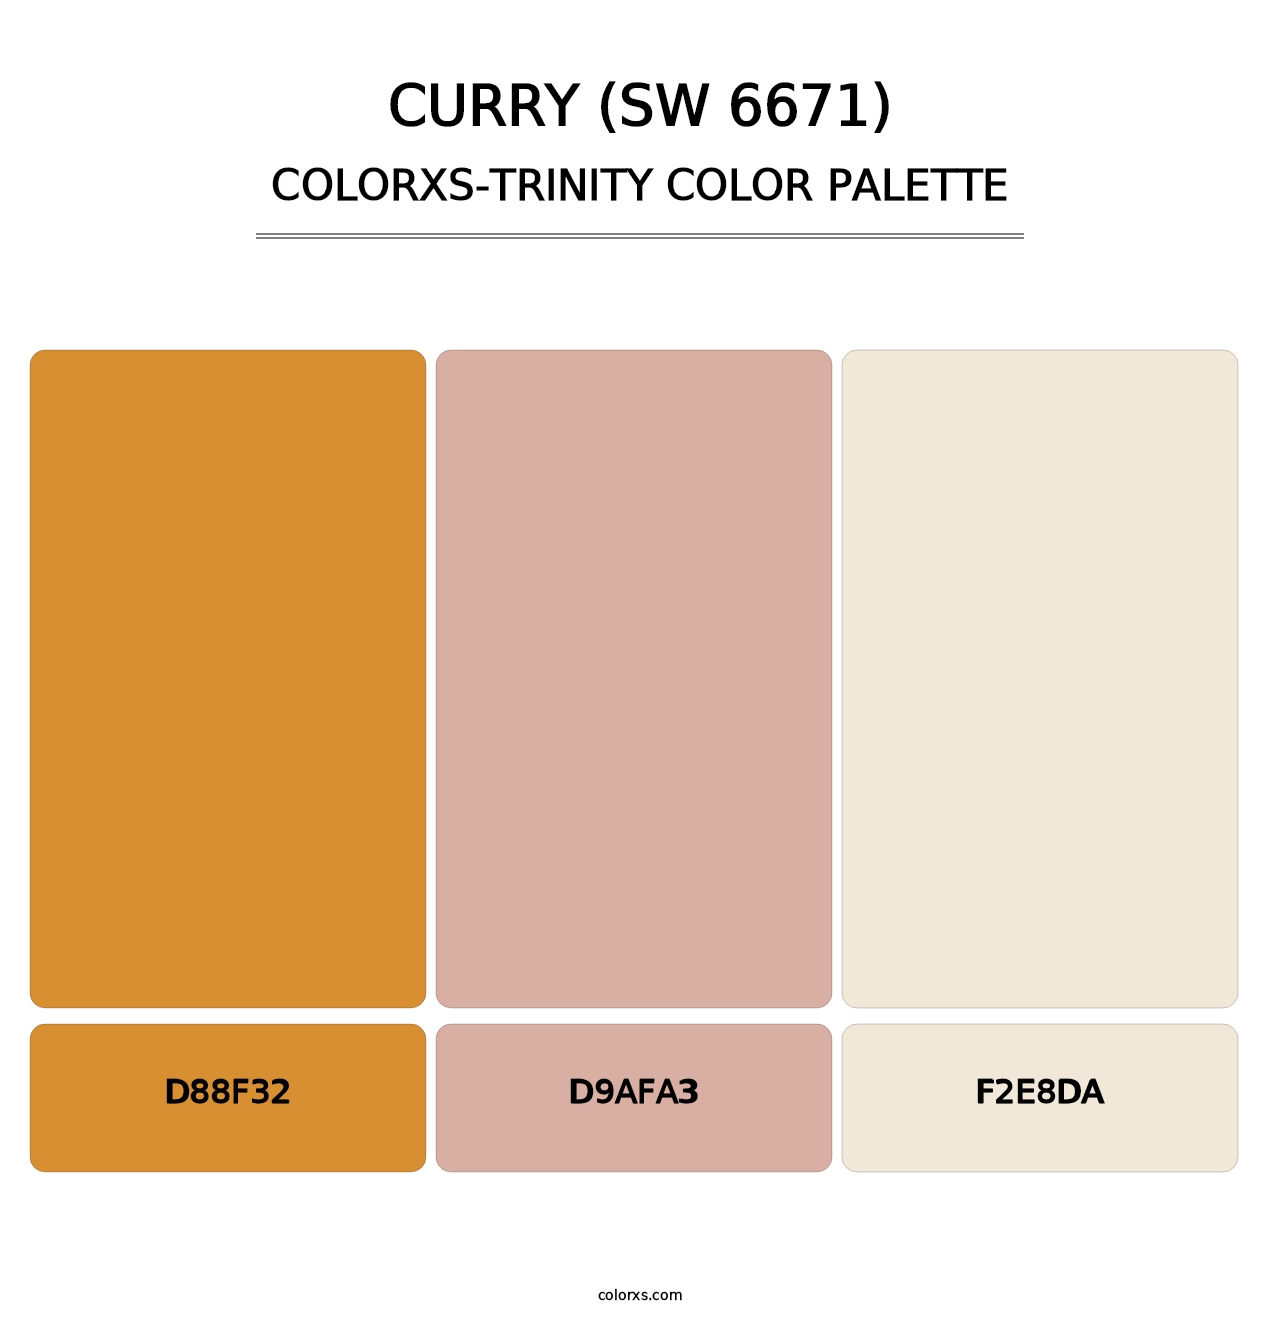 Curry (SW 6671) - Colorxs Trinity Palette